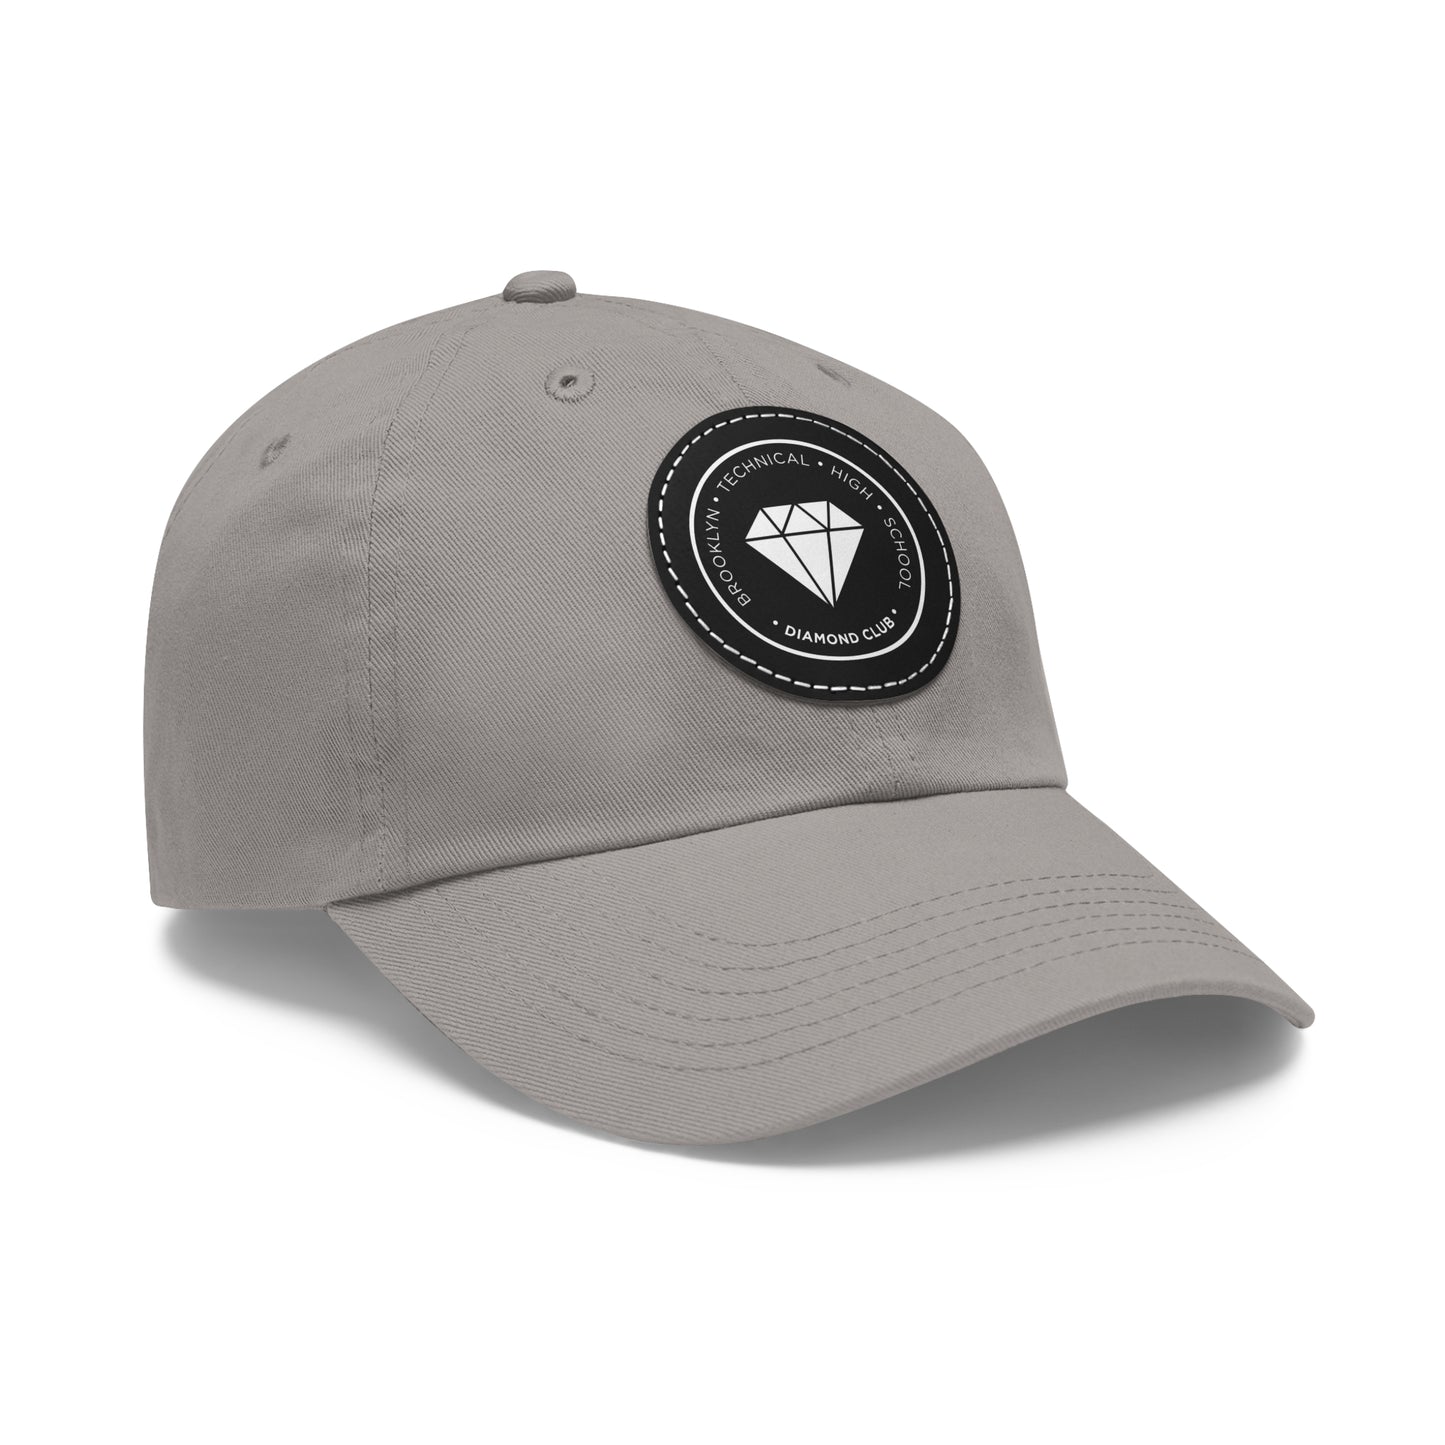 Diamond Club Logo - Hat With Circular Leather Patch - White